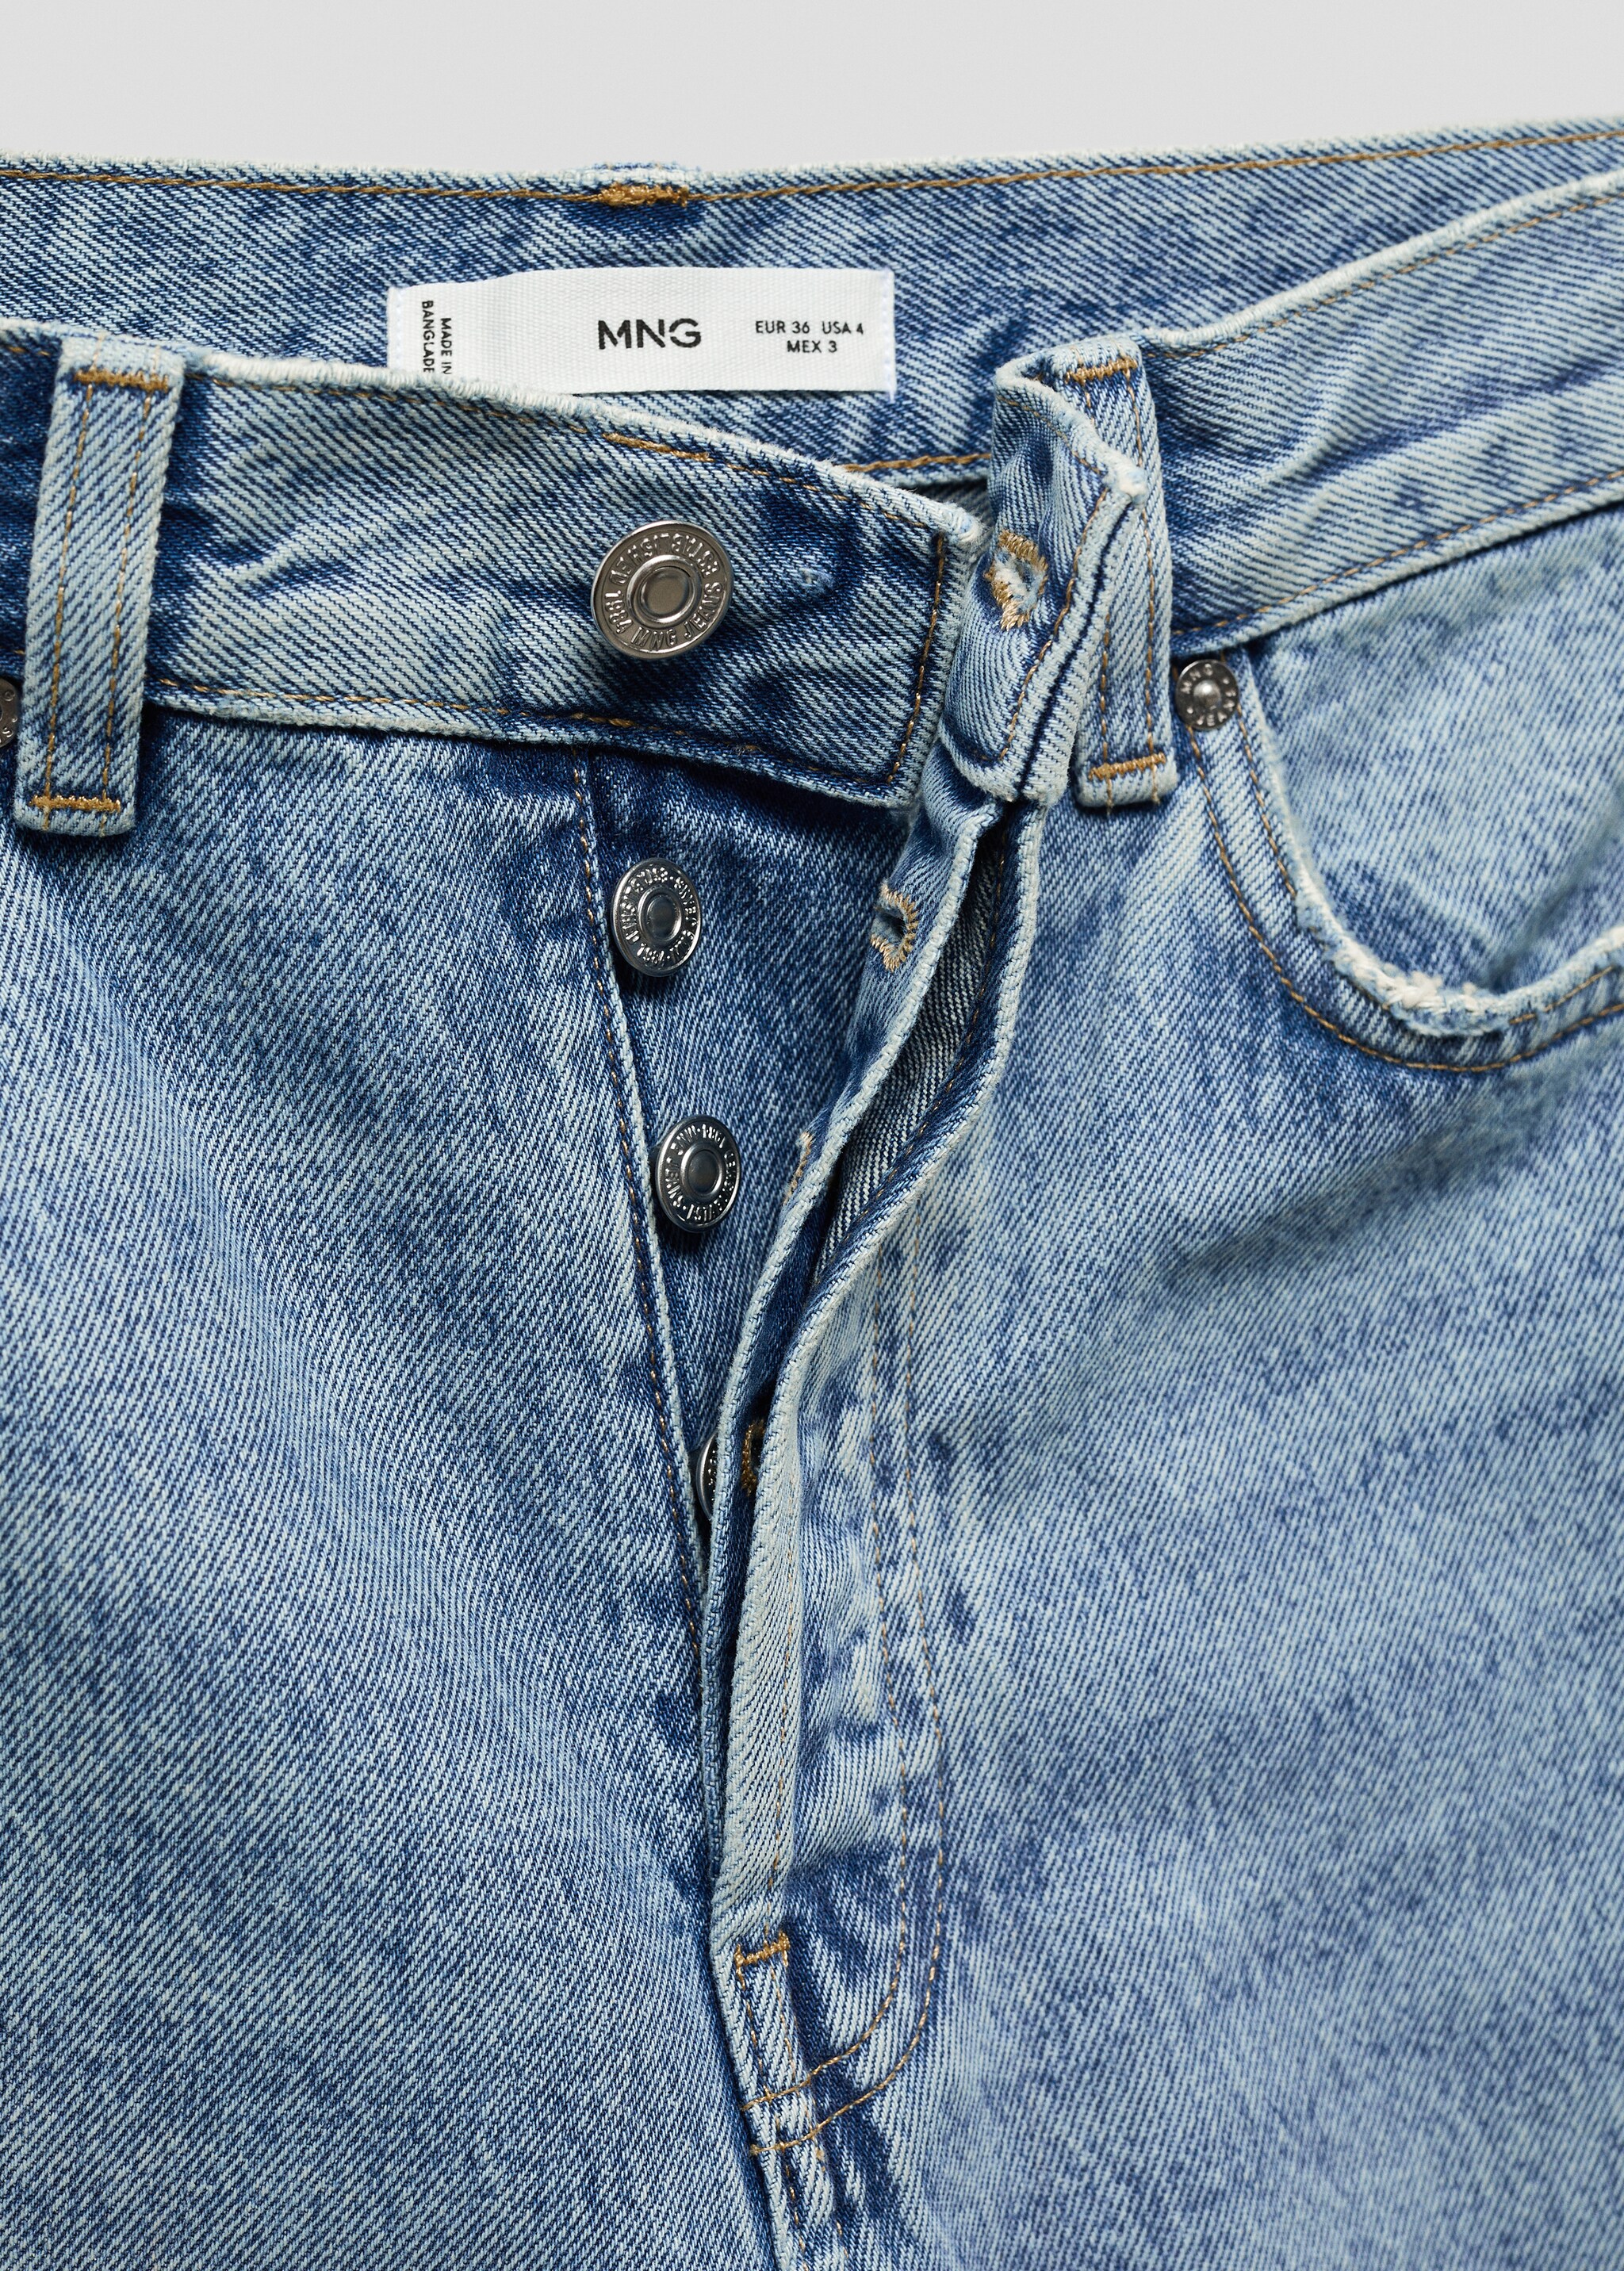 Straight jeans with forward seams - Details of the article 8